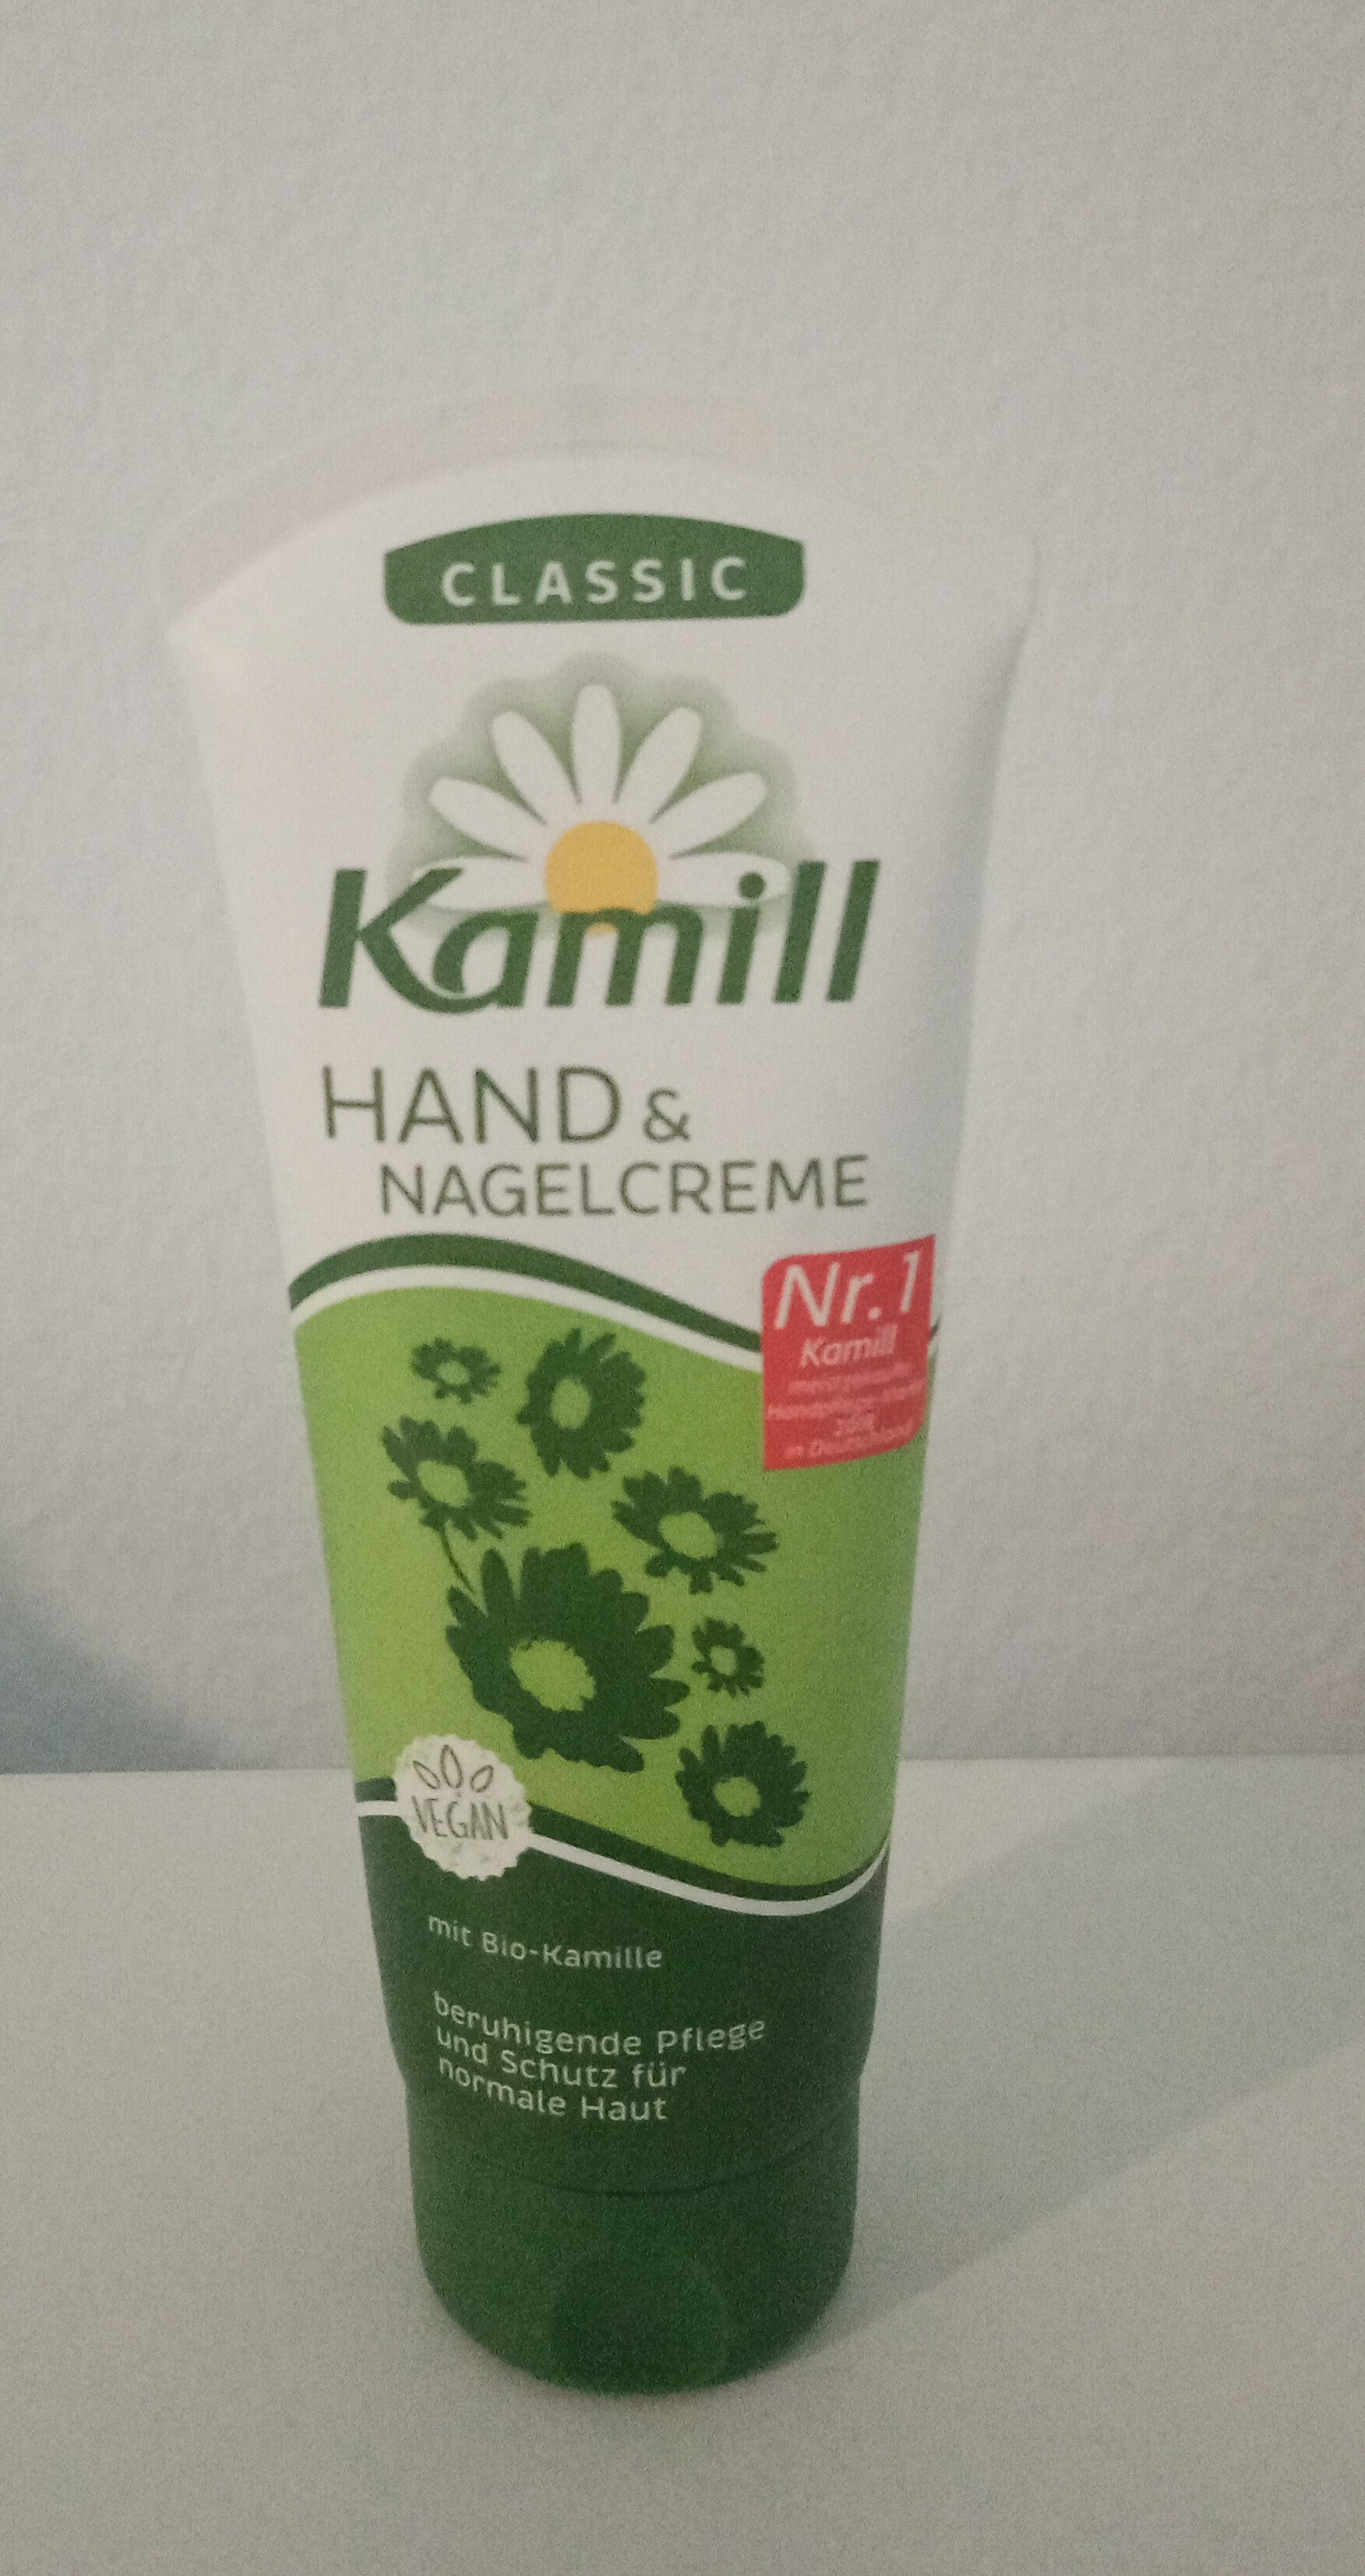 Kamill Hand- & Nagelcreme classic - Product - de